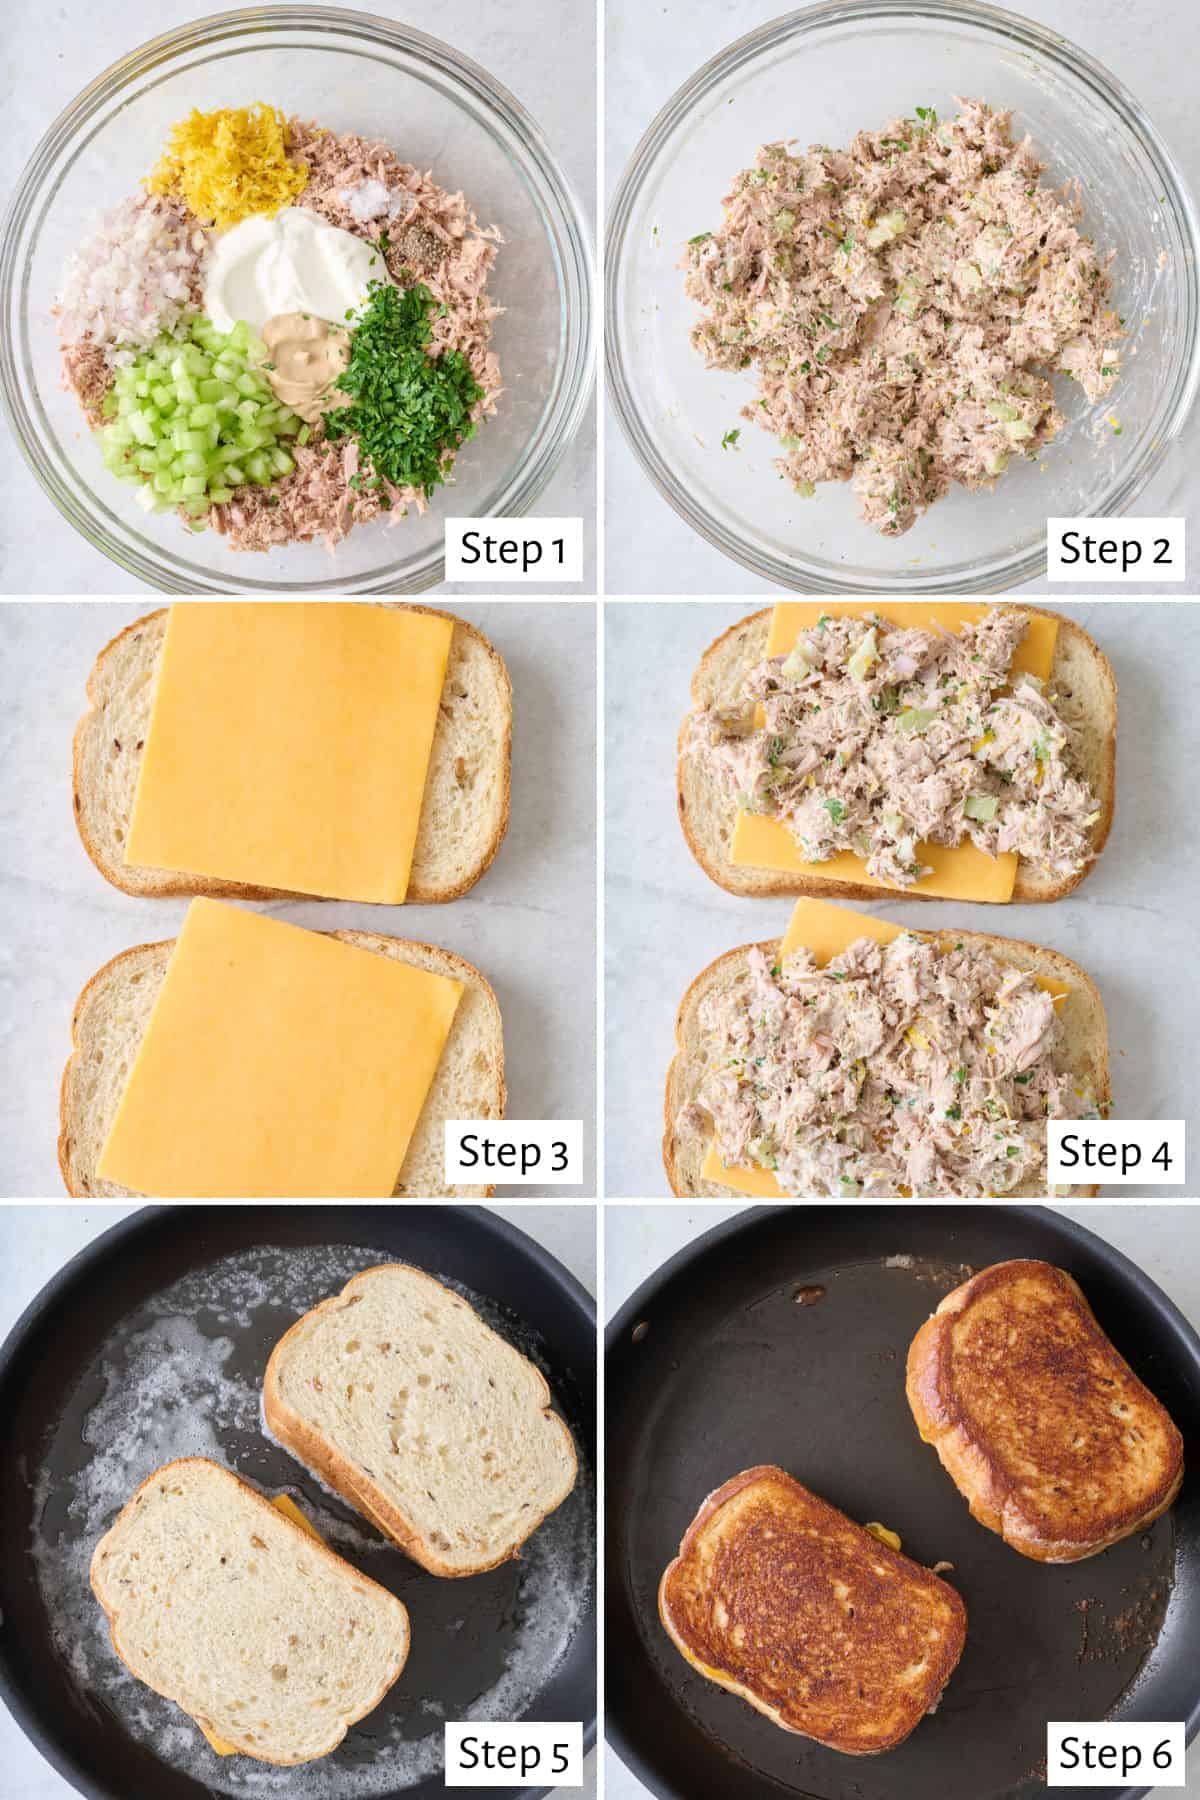 6 image collage making recipe: 1- ingredients in a bowl before mixing, 2- after mixing, 3- two slices of bread with sliced cheese, 4- tuna salad added to both sides, 5- two sandwiches in a skillet, 6- after flipping.